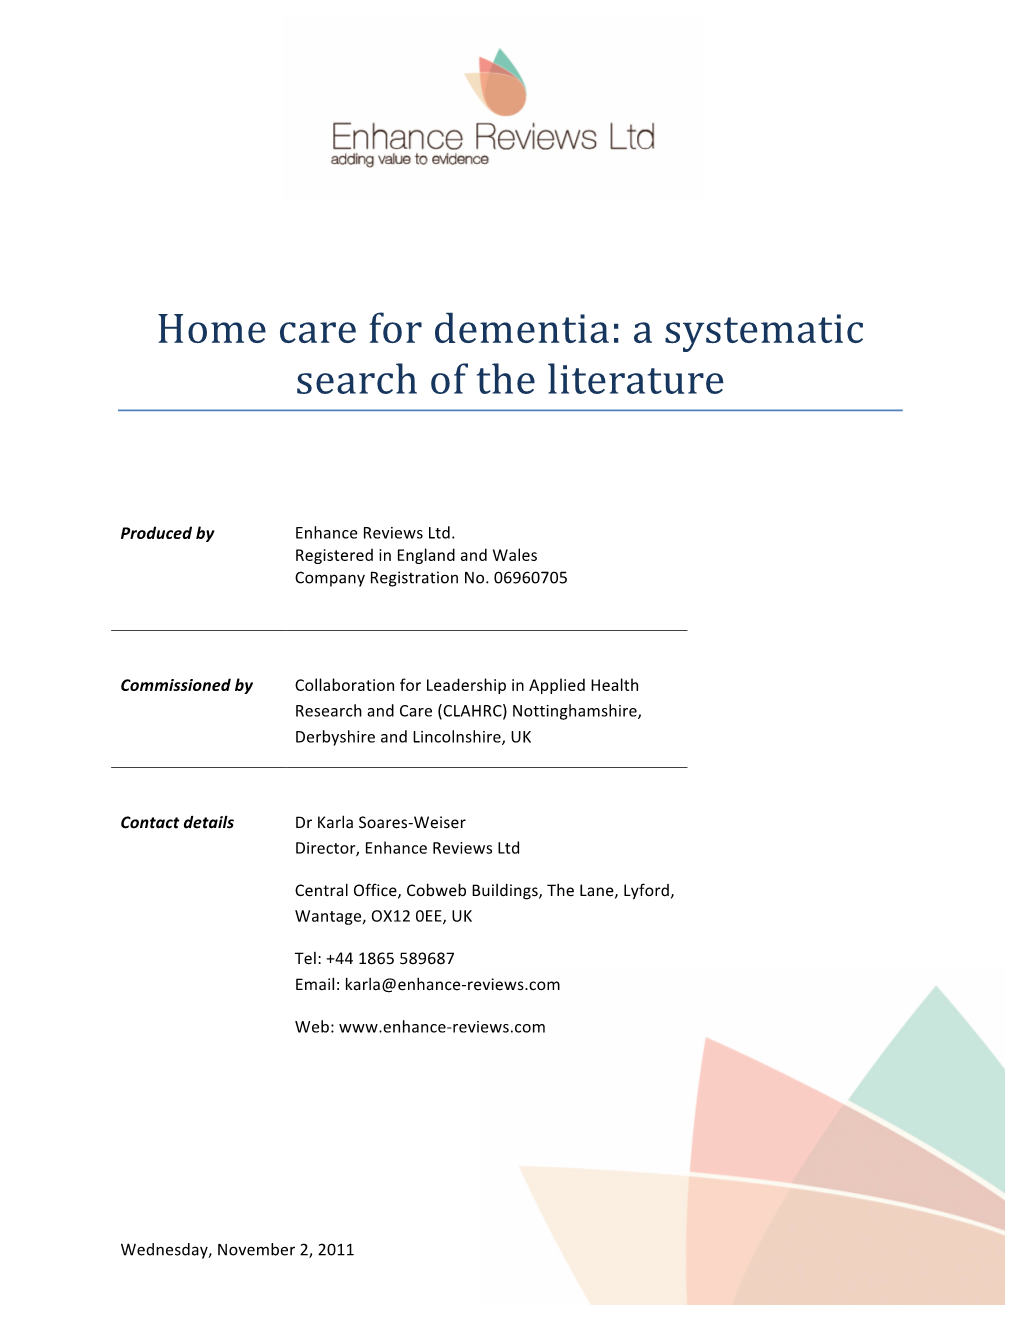 Home Care for Dementia: a Systematic Search of the Literature